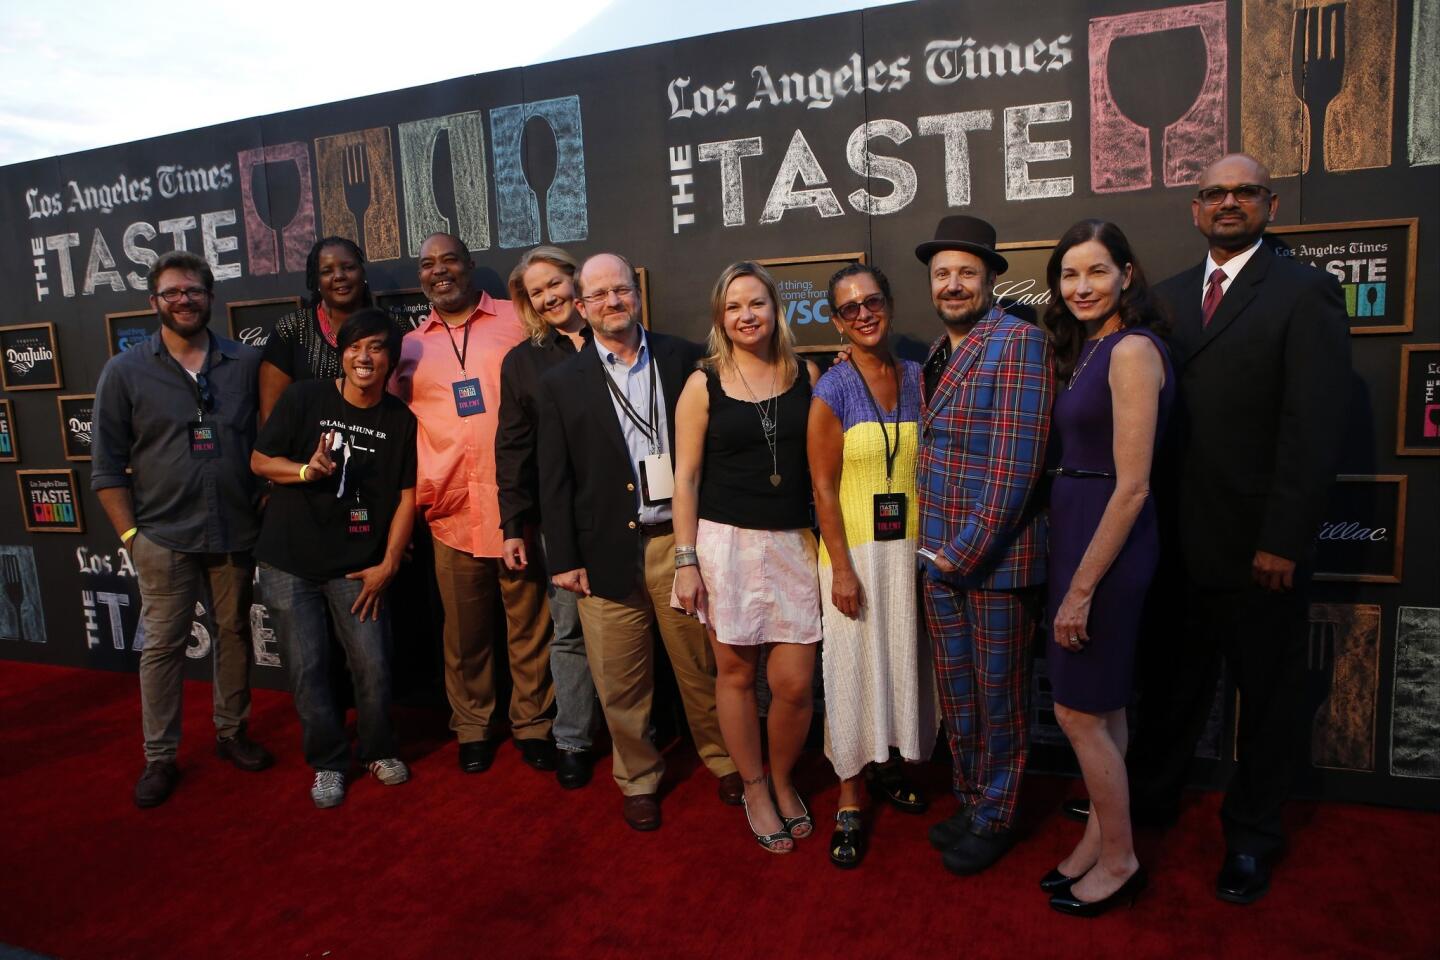 Guests, Chefs, and LA Times employees